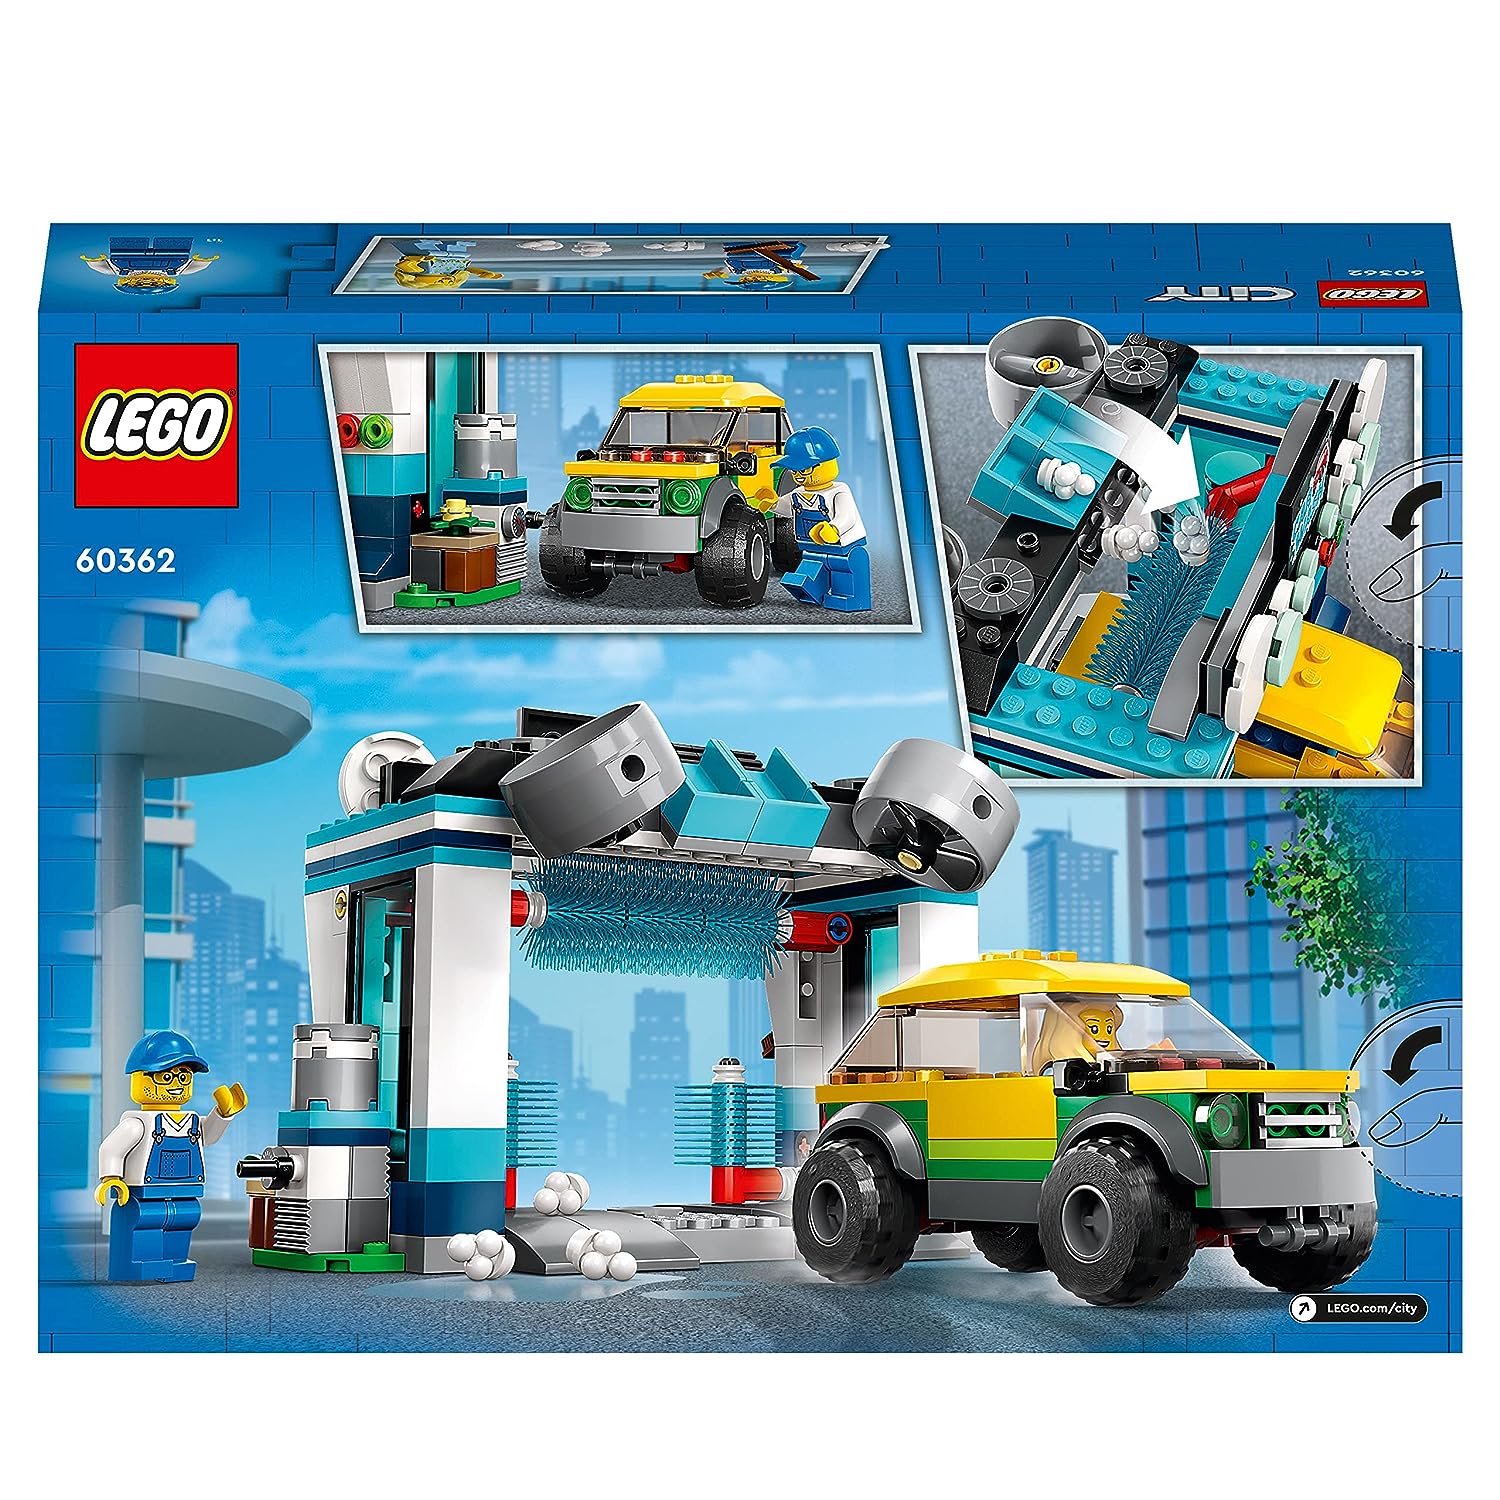 LEGO City Car Wash Building Kit for Ages 6+